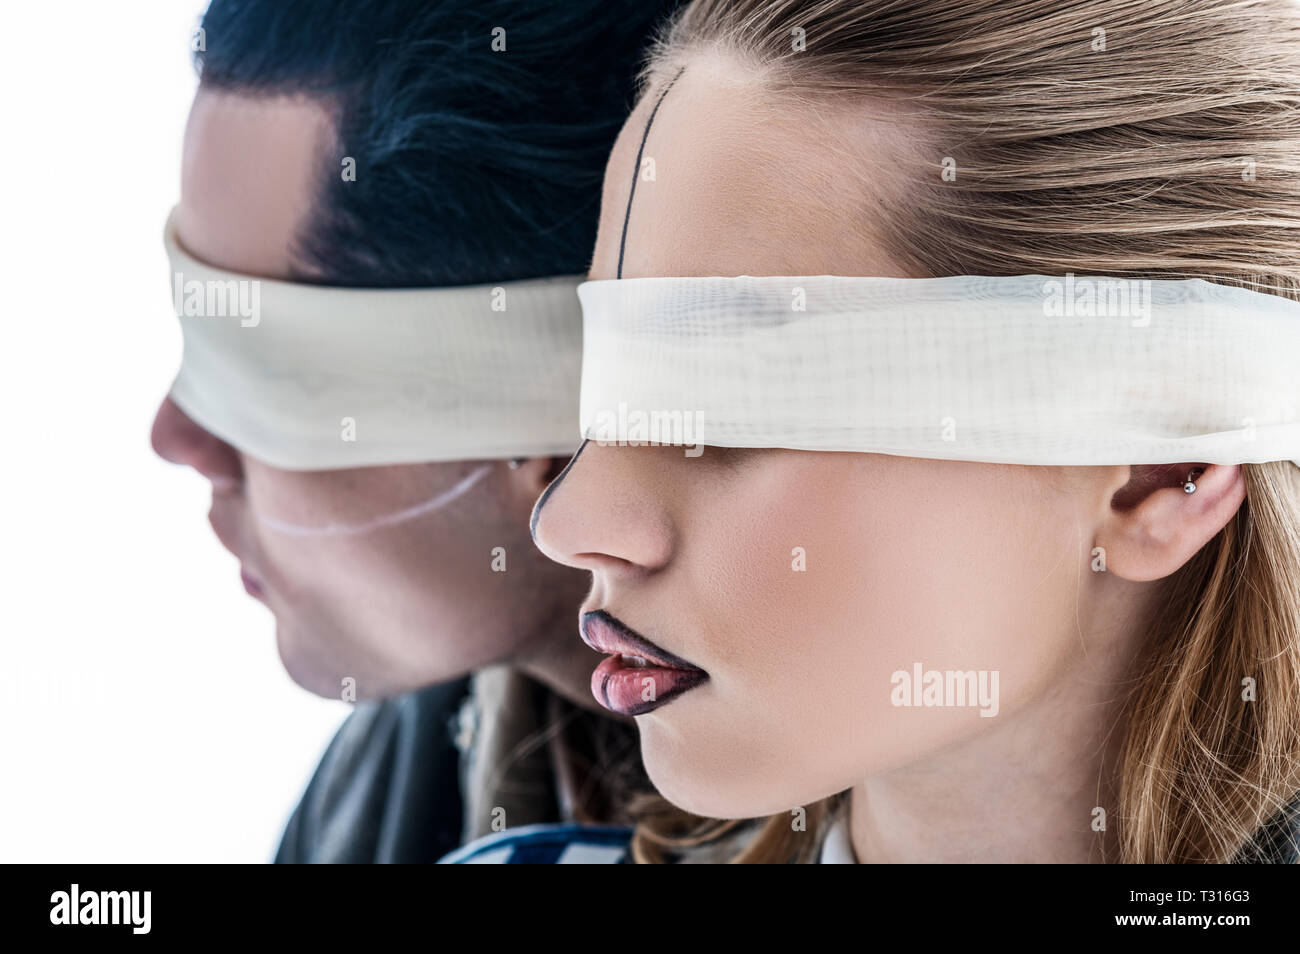 Male And Female Models Having Blindfolds And Lines On Face Stock